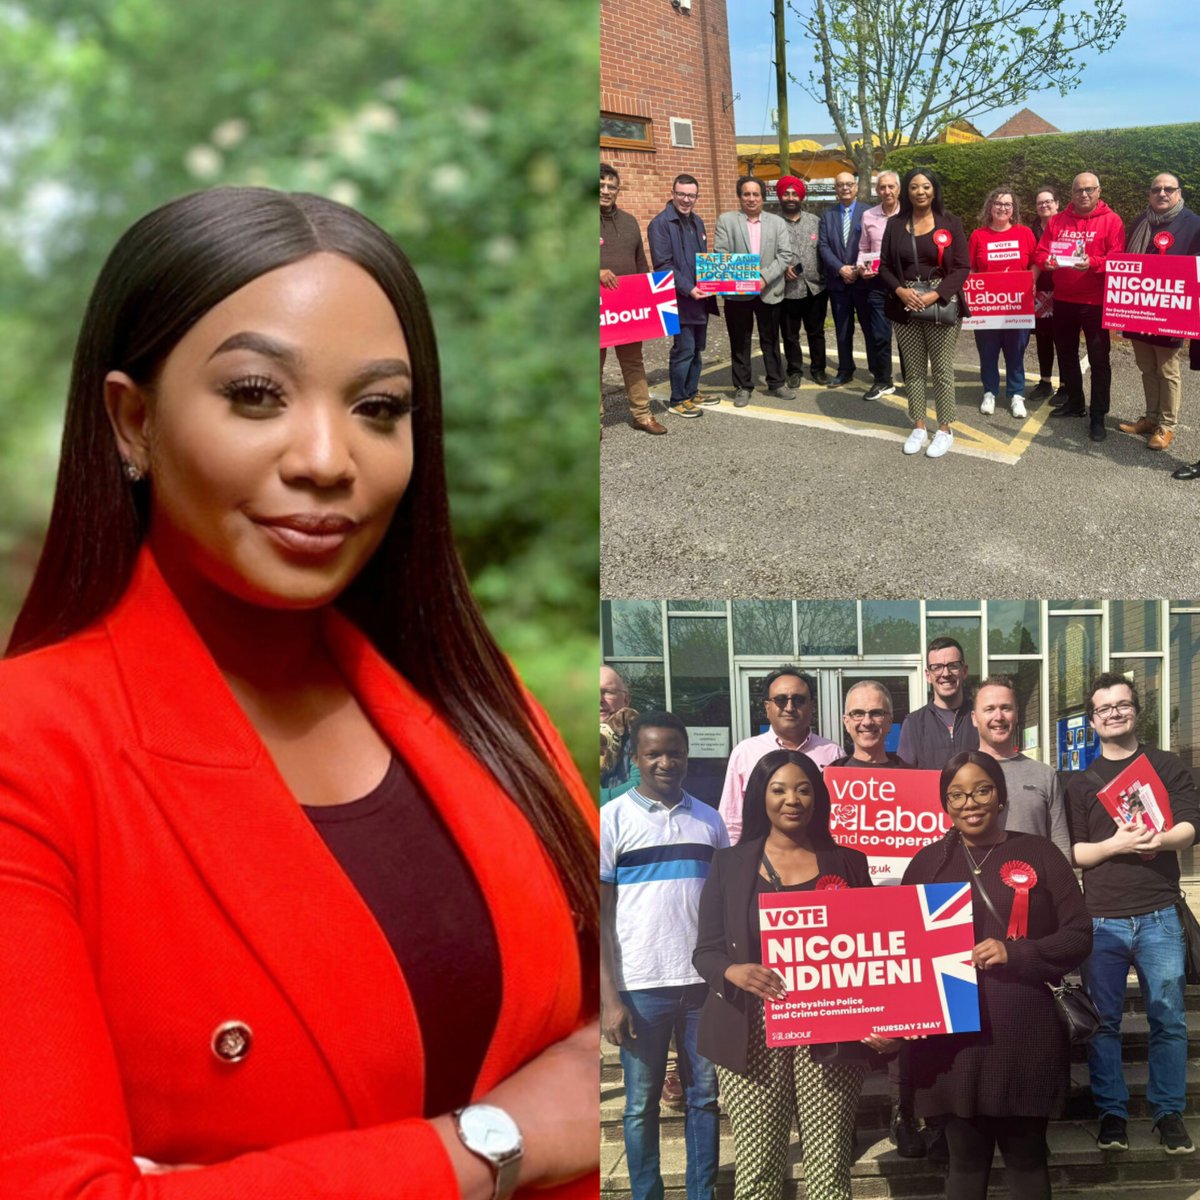 Zimbabwean-Born Nicolle Ndiweni Elected as Derbyshire's New Police and Crime Commissioner in the UK Zimbabwean-born politician Nicolle Ndiweni has made history once again, this time by being officially elected as the new Police and Crime Commissioner (PCC) for Derbyshire. The